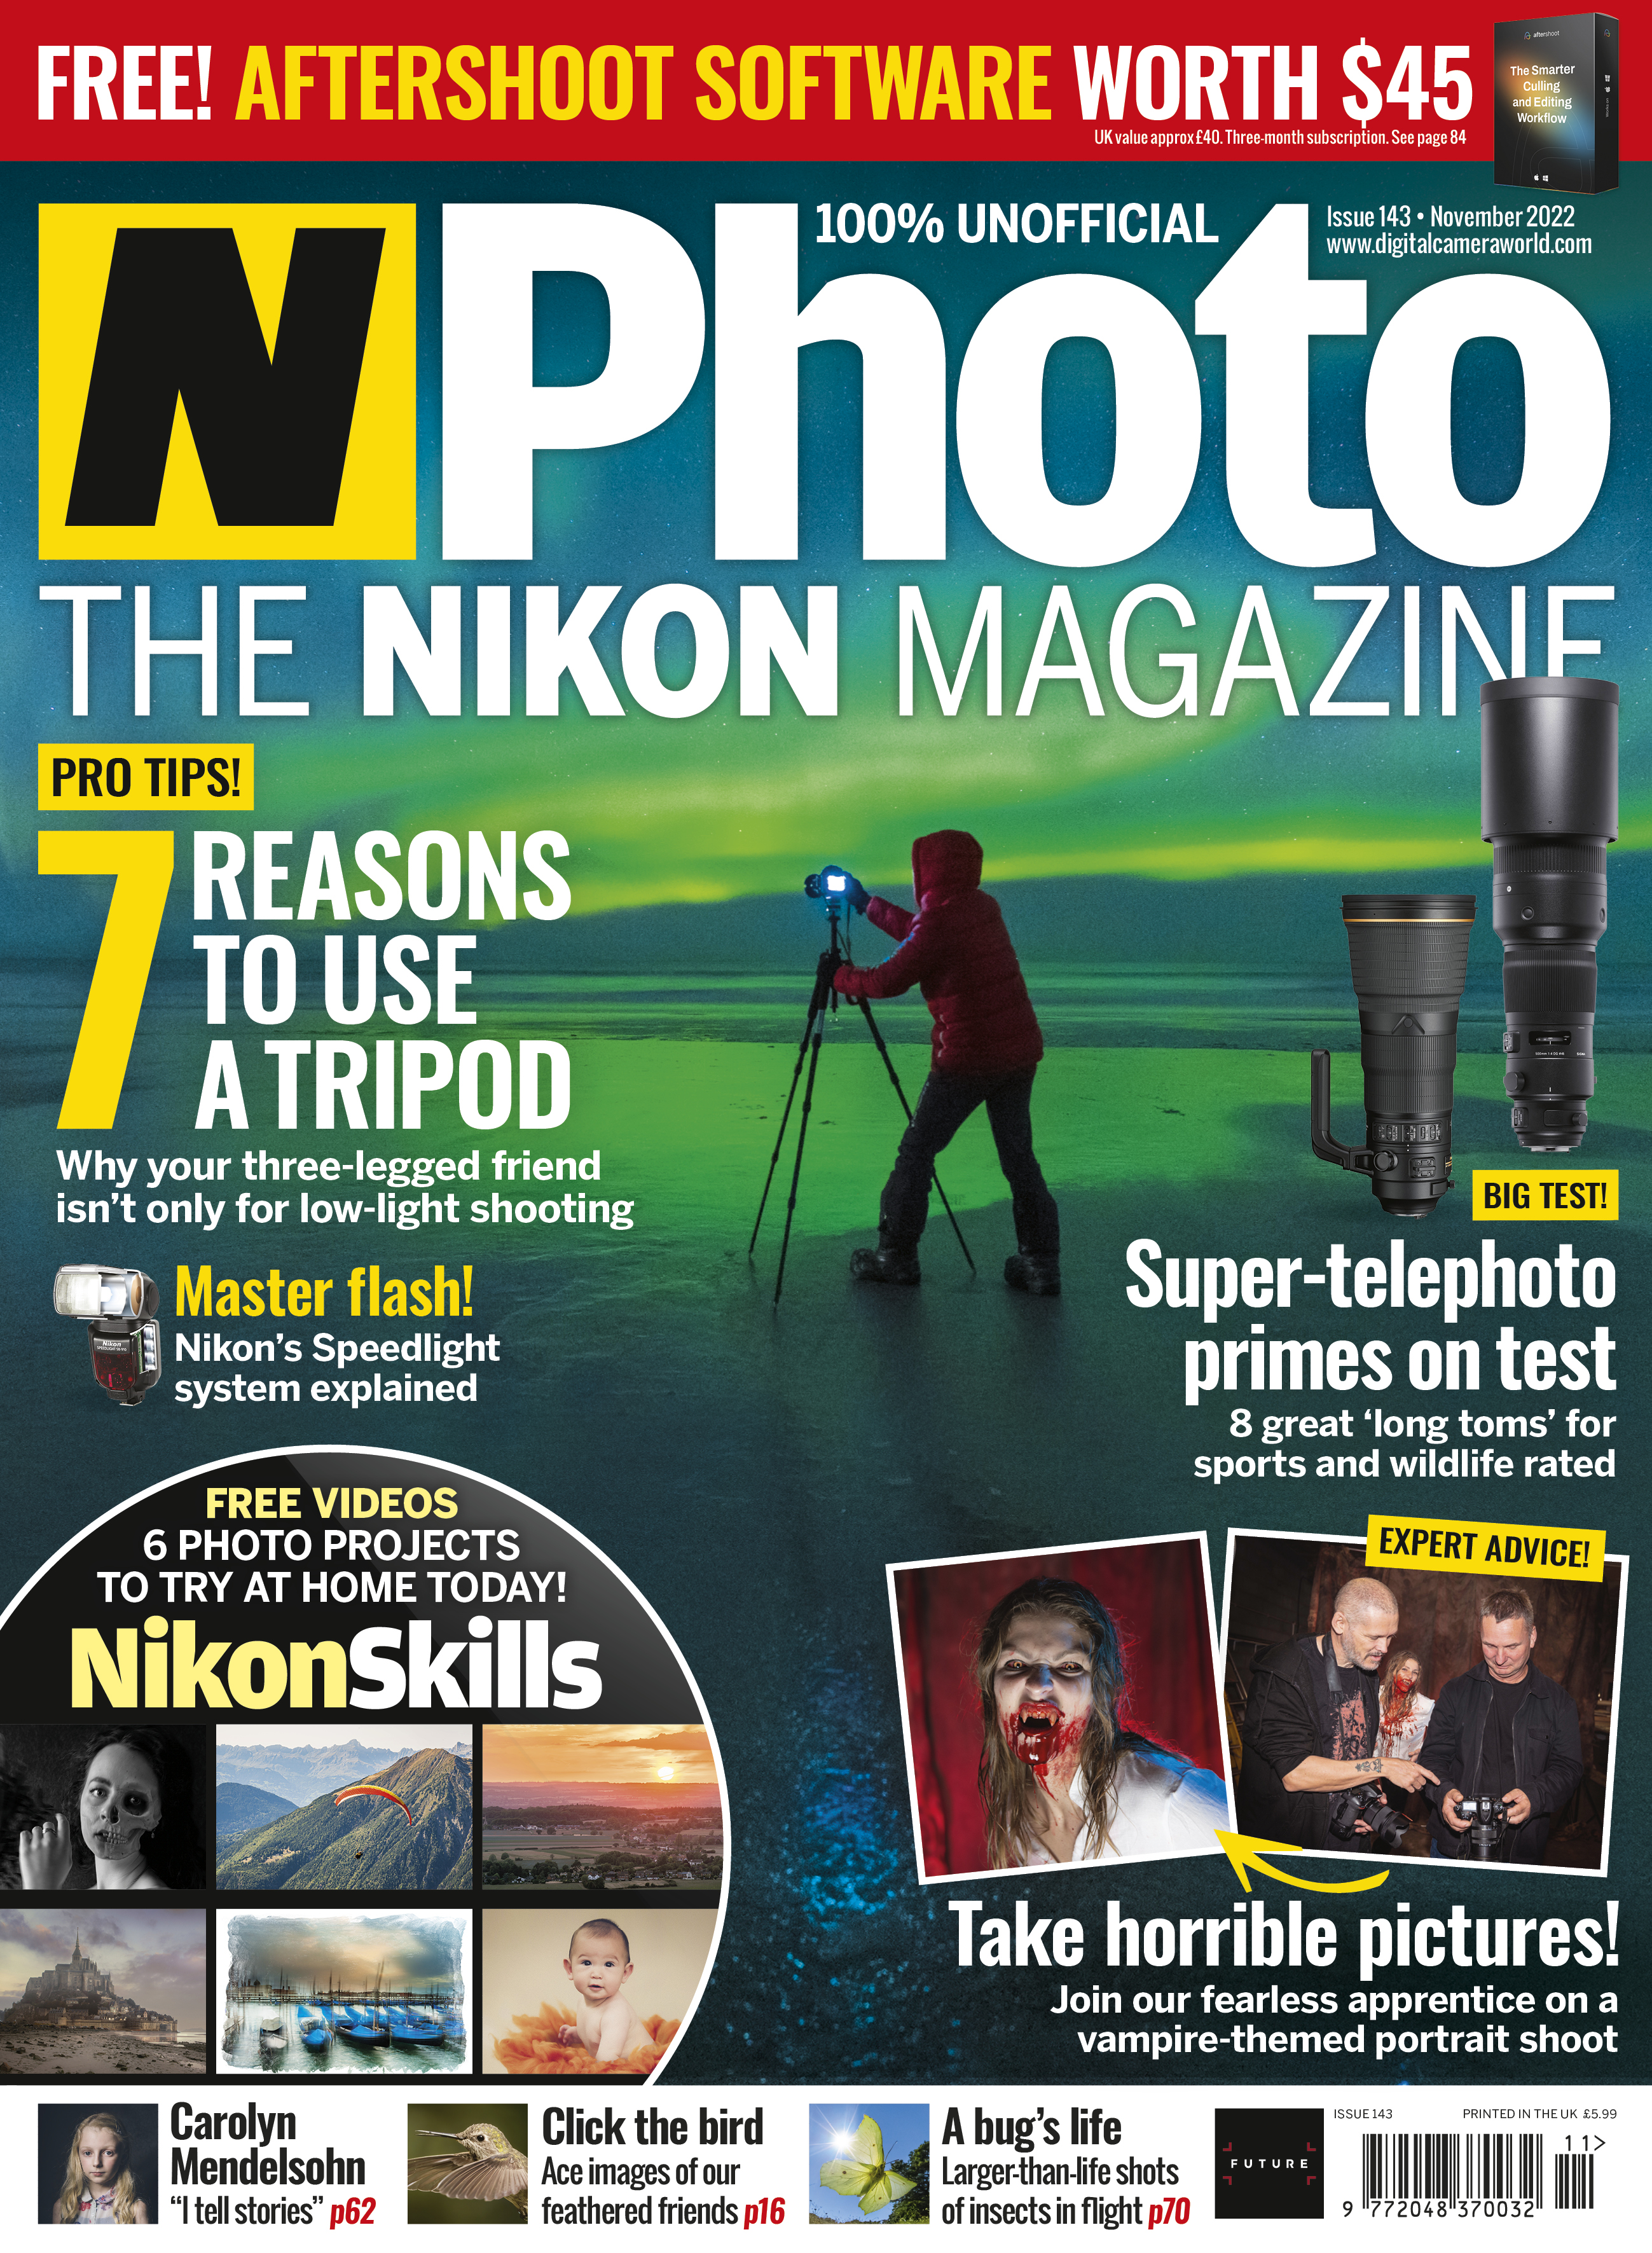 7 reasons to use a tripod! N-Photo 143 on sale today